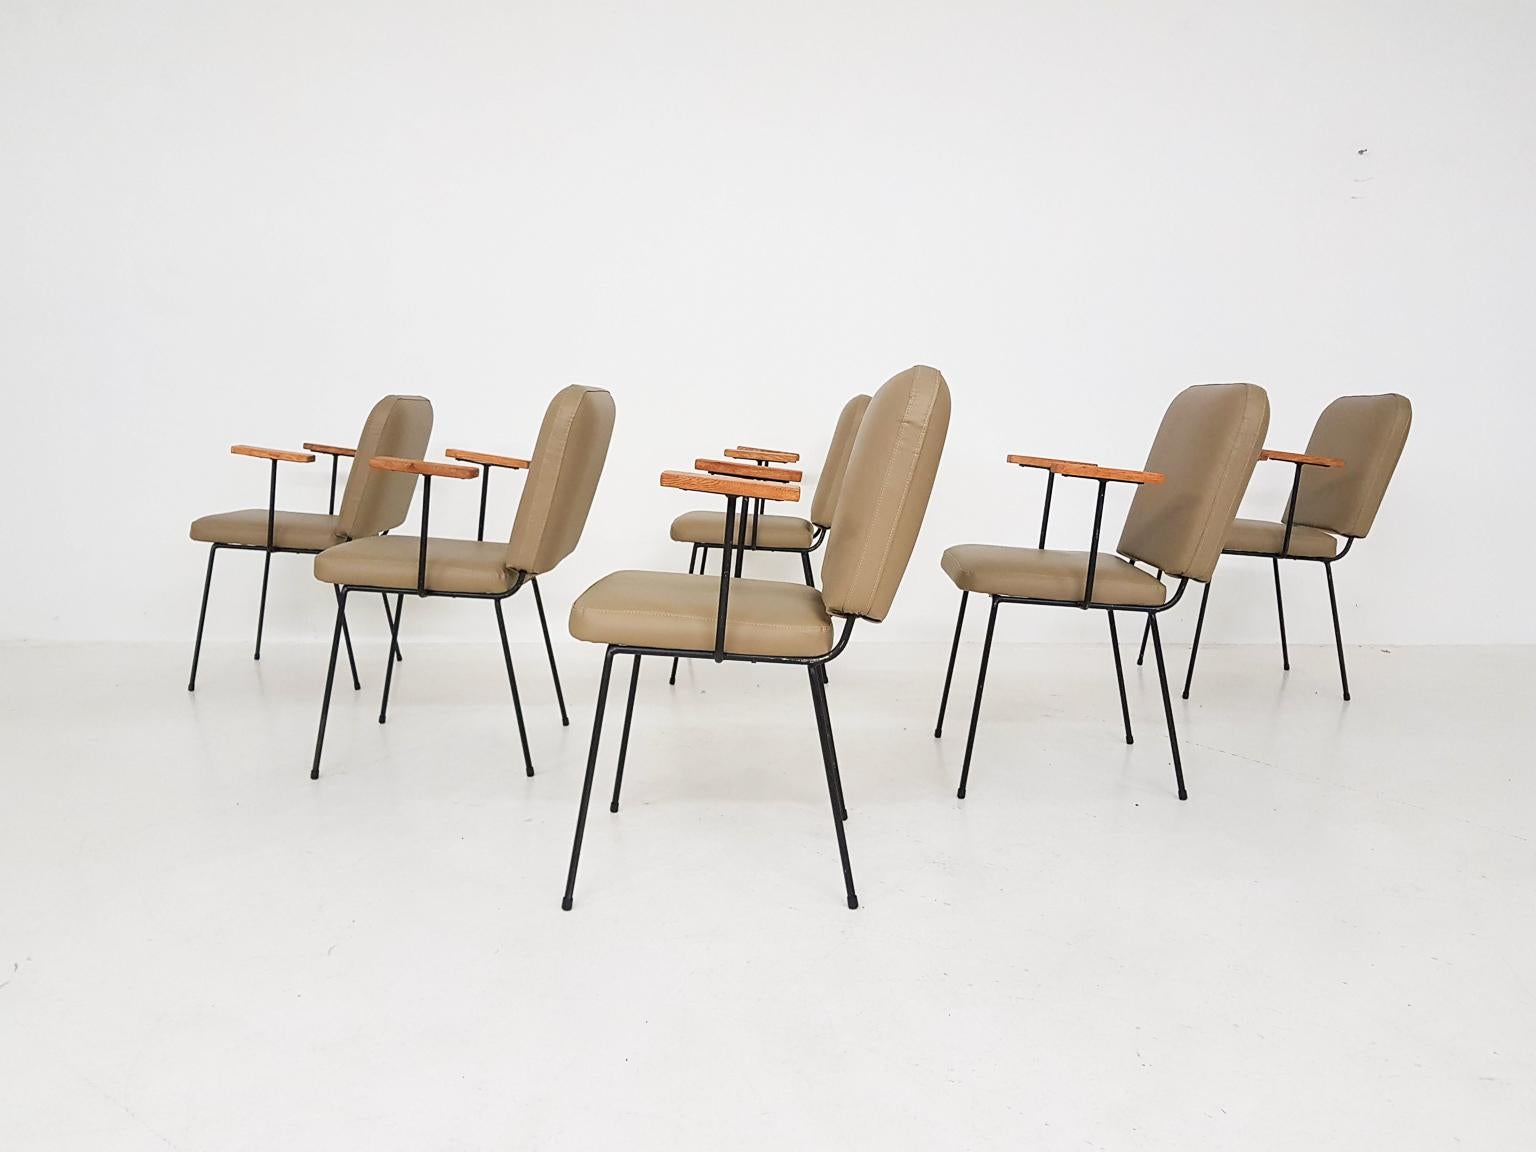 Mid-Century Modern Set of 6 Bistro or Dining Chairs in Beige Leatherette, Europe, 1960s